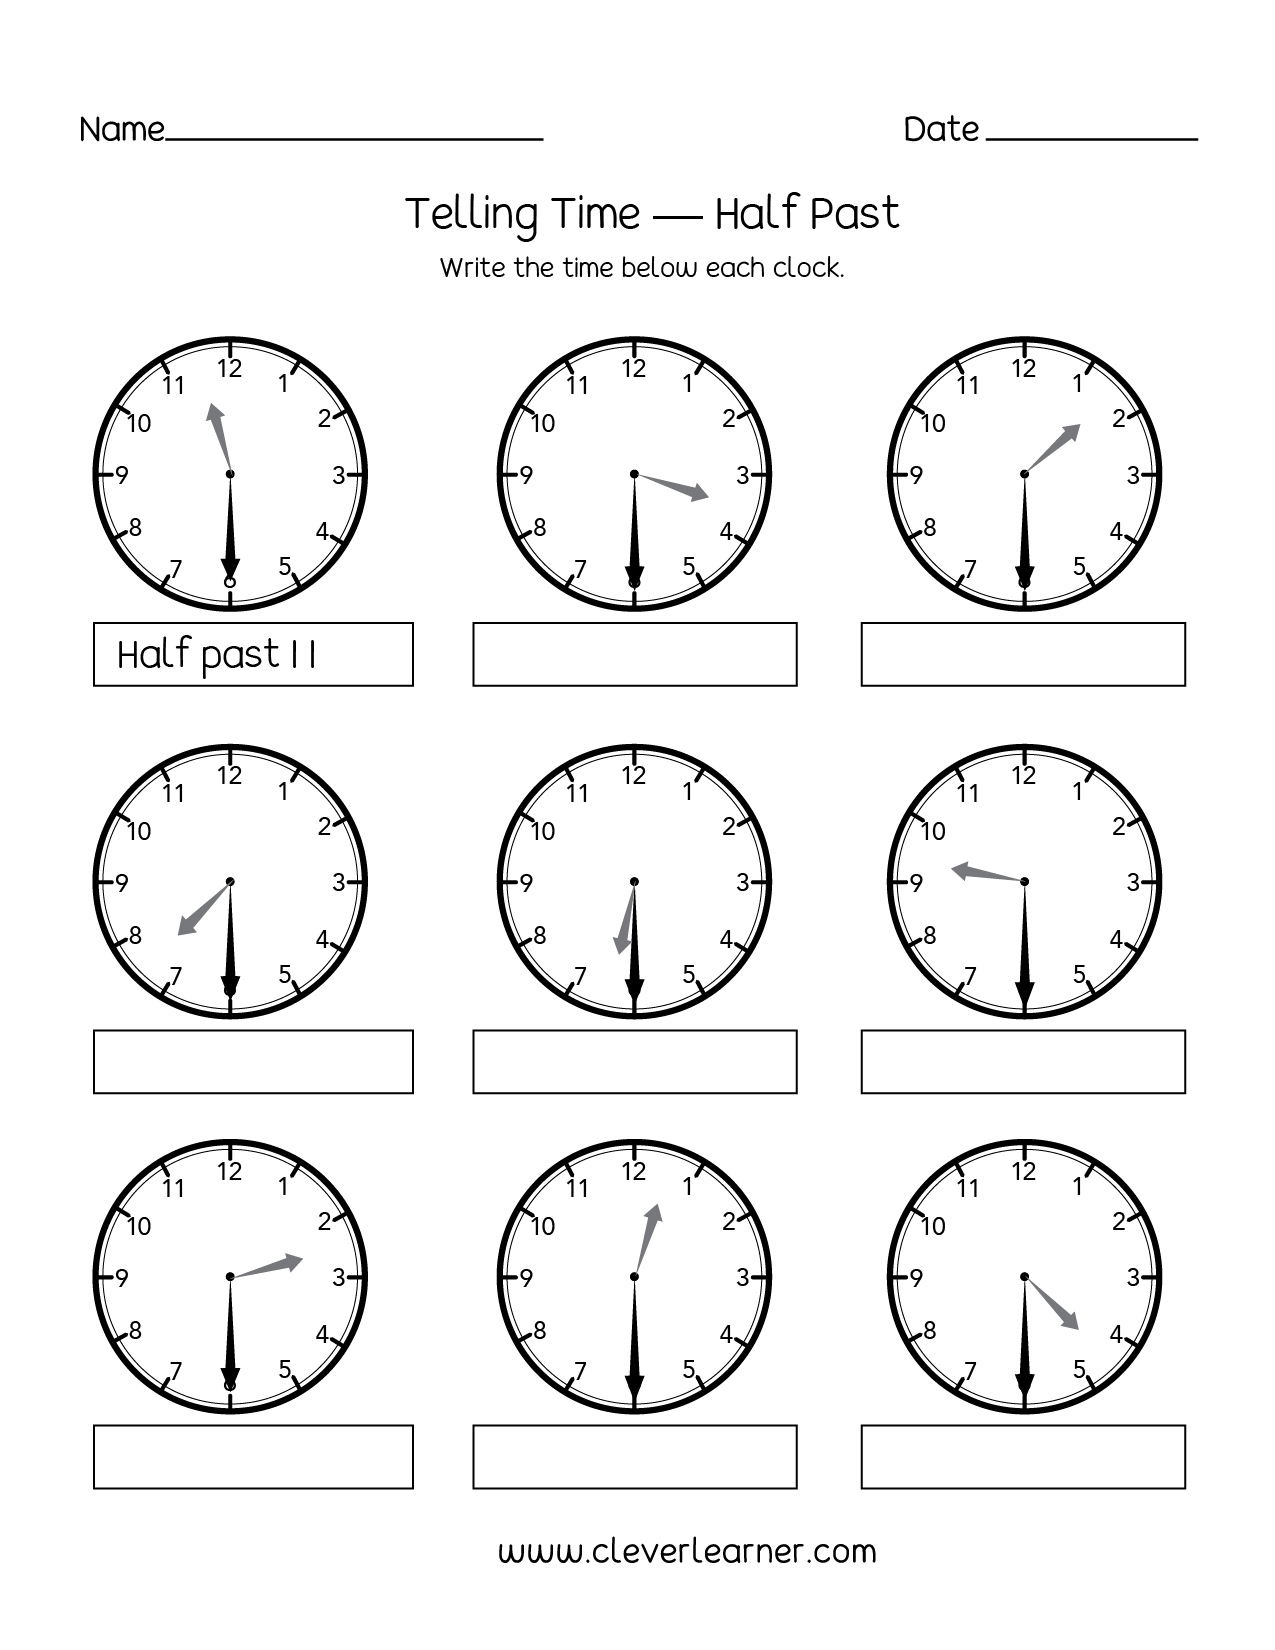 telling-time-half-past-the-hour-worksheets-for-1st-and-2nd-graders-telling-time-worksheets-o